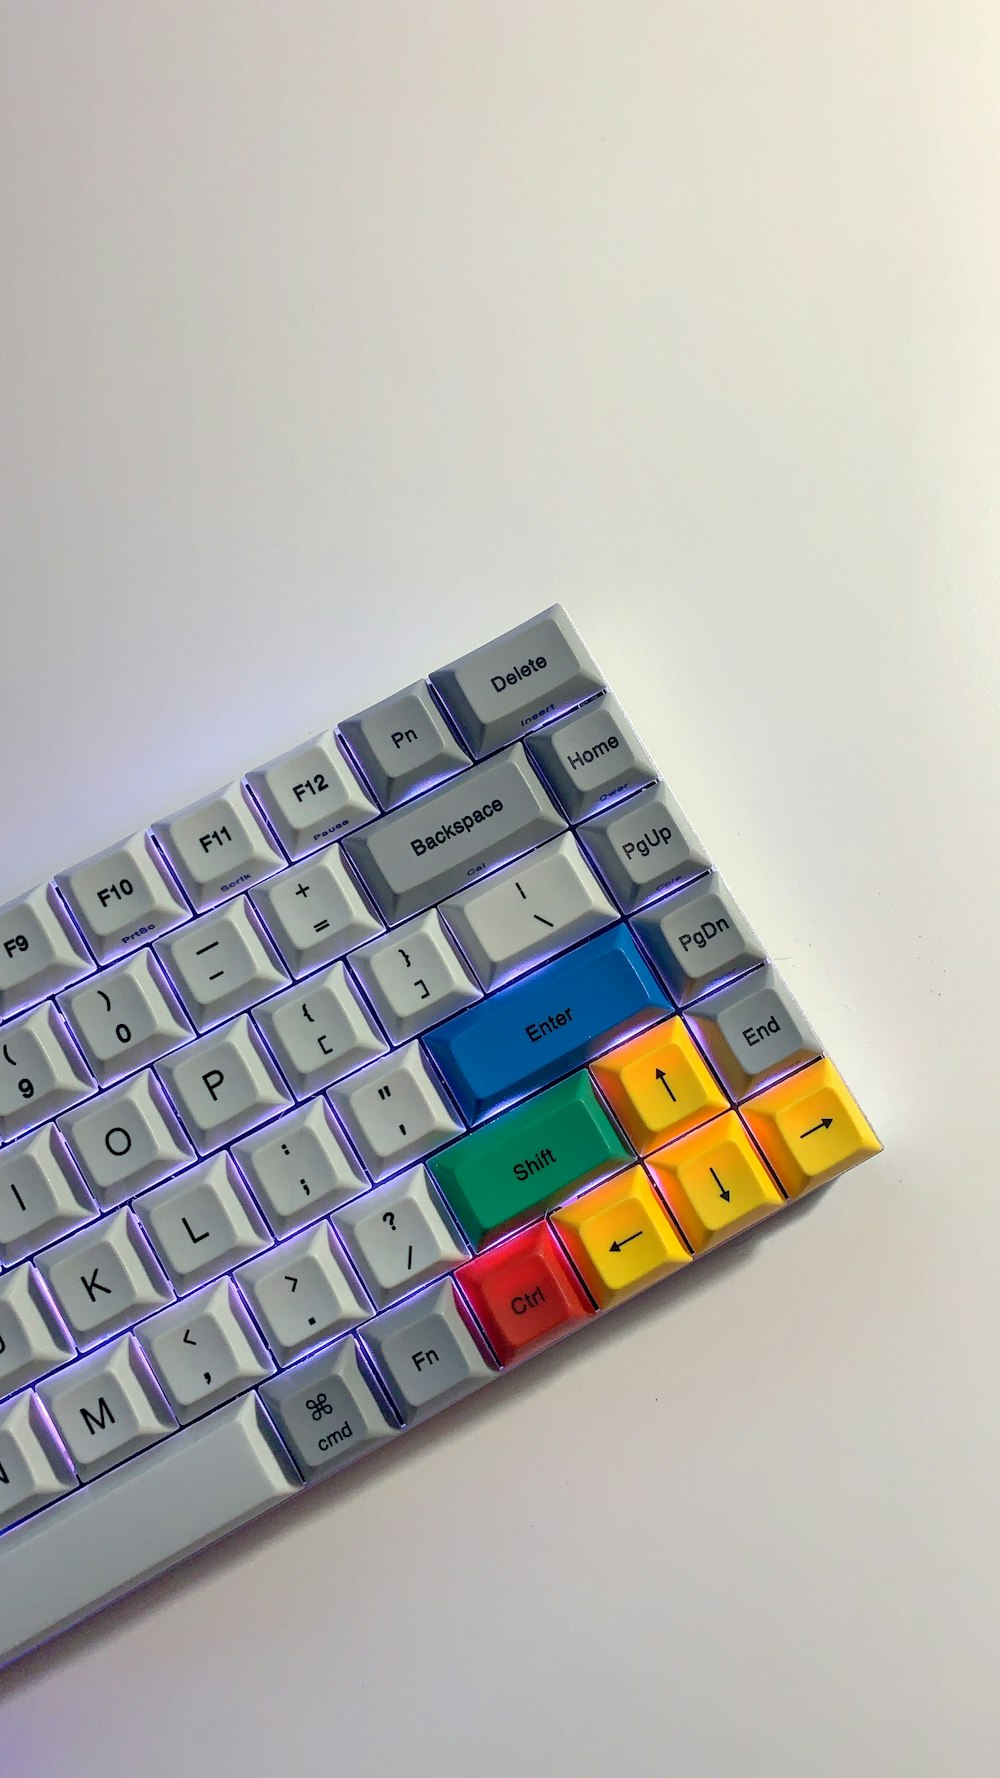 white, gray, blue, and yellow computer keyboard